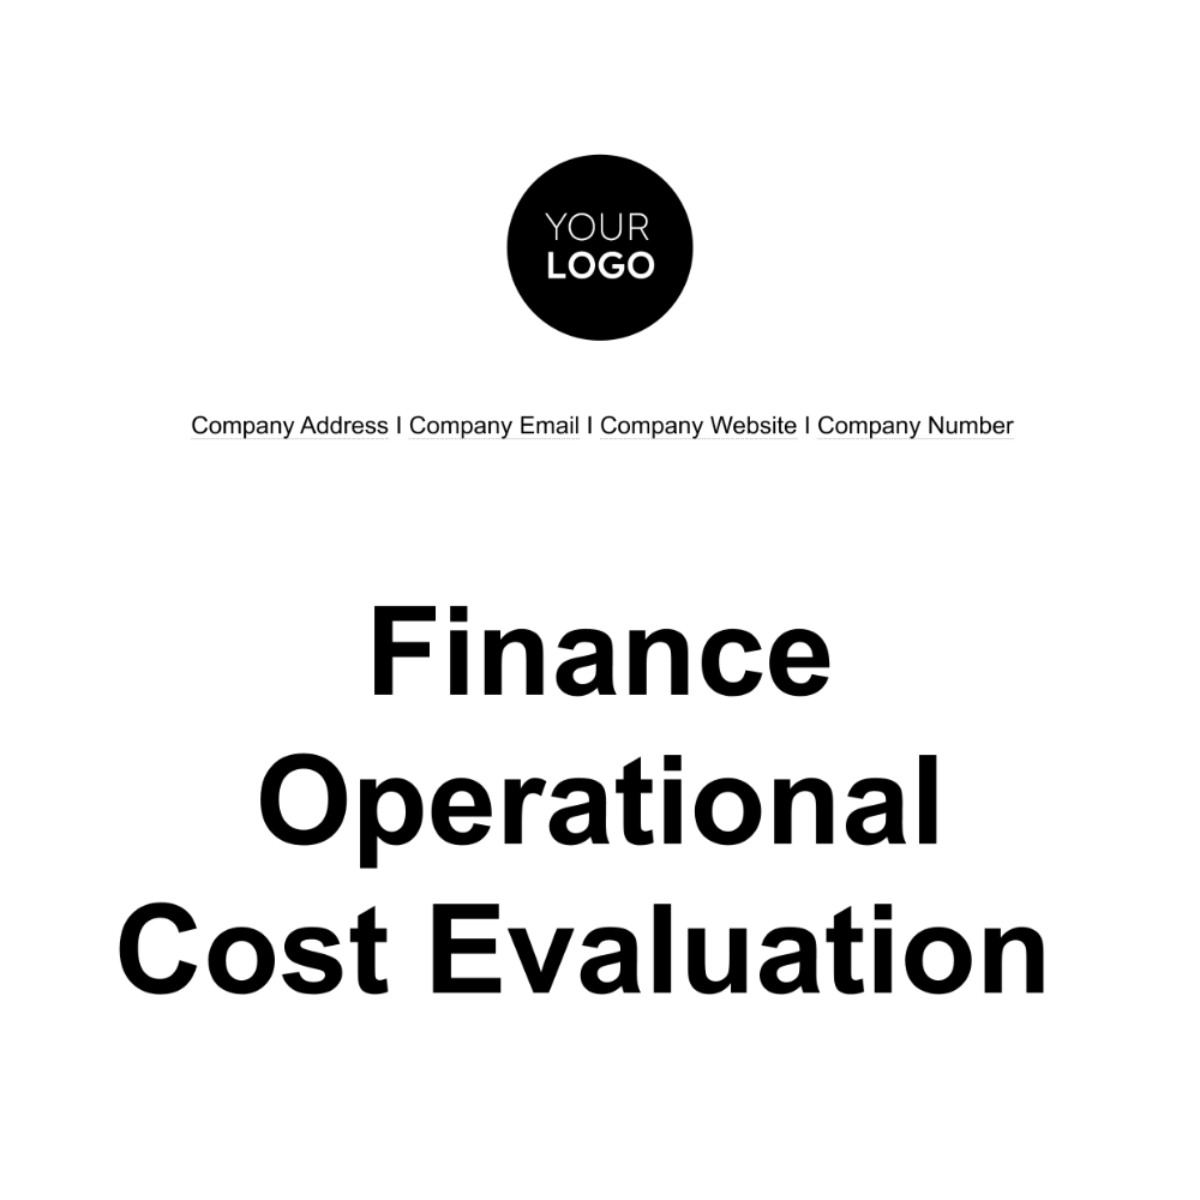 Finance Operational Cost Evaluation Template